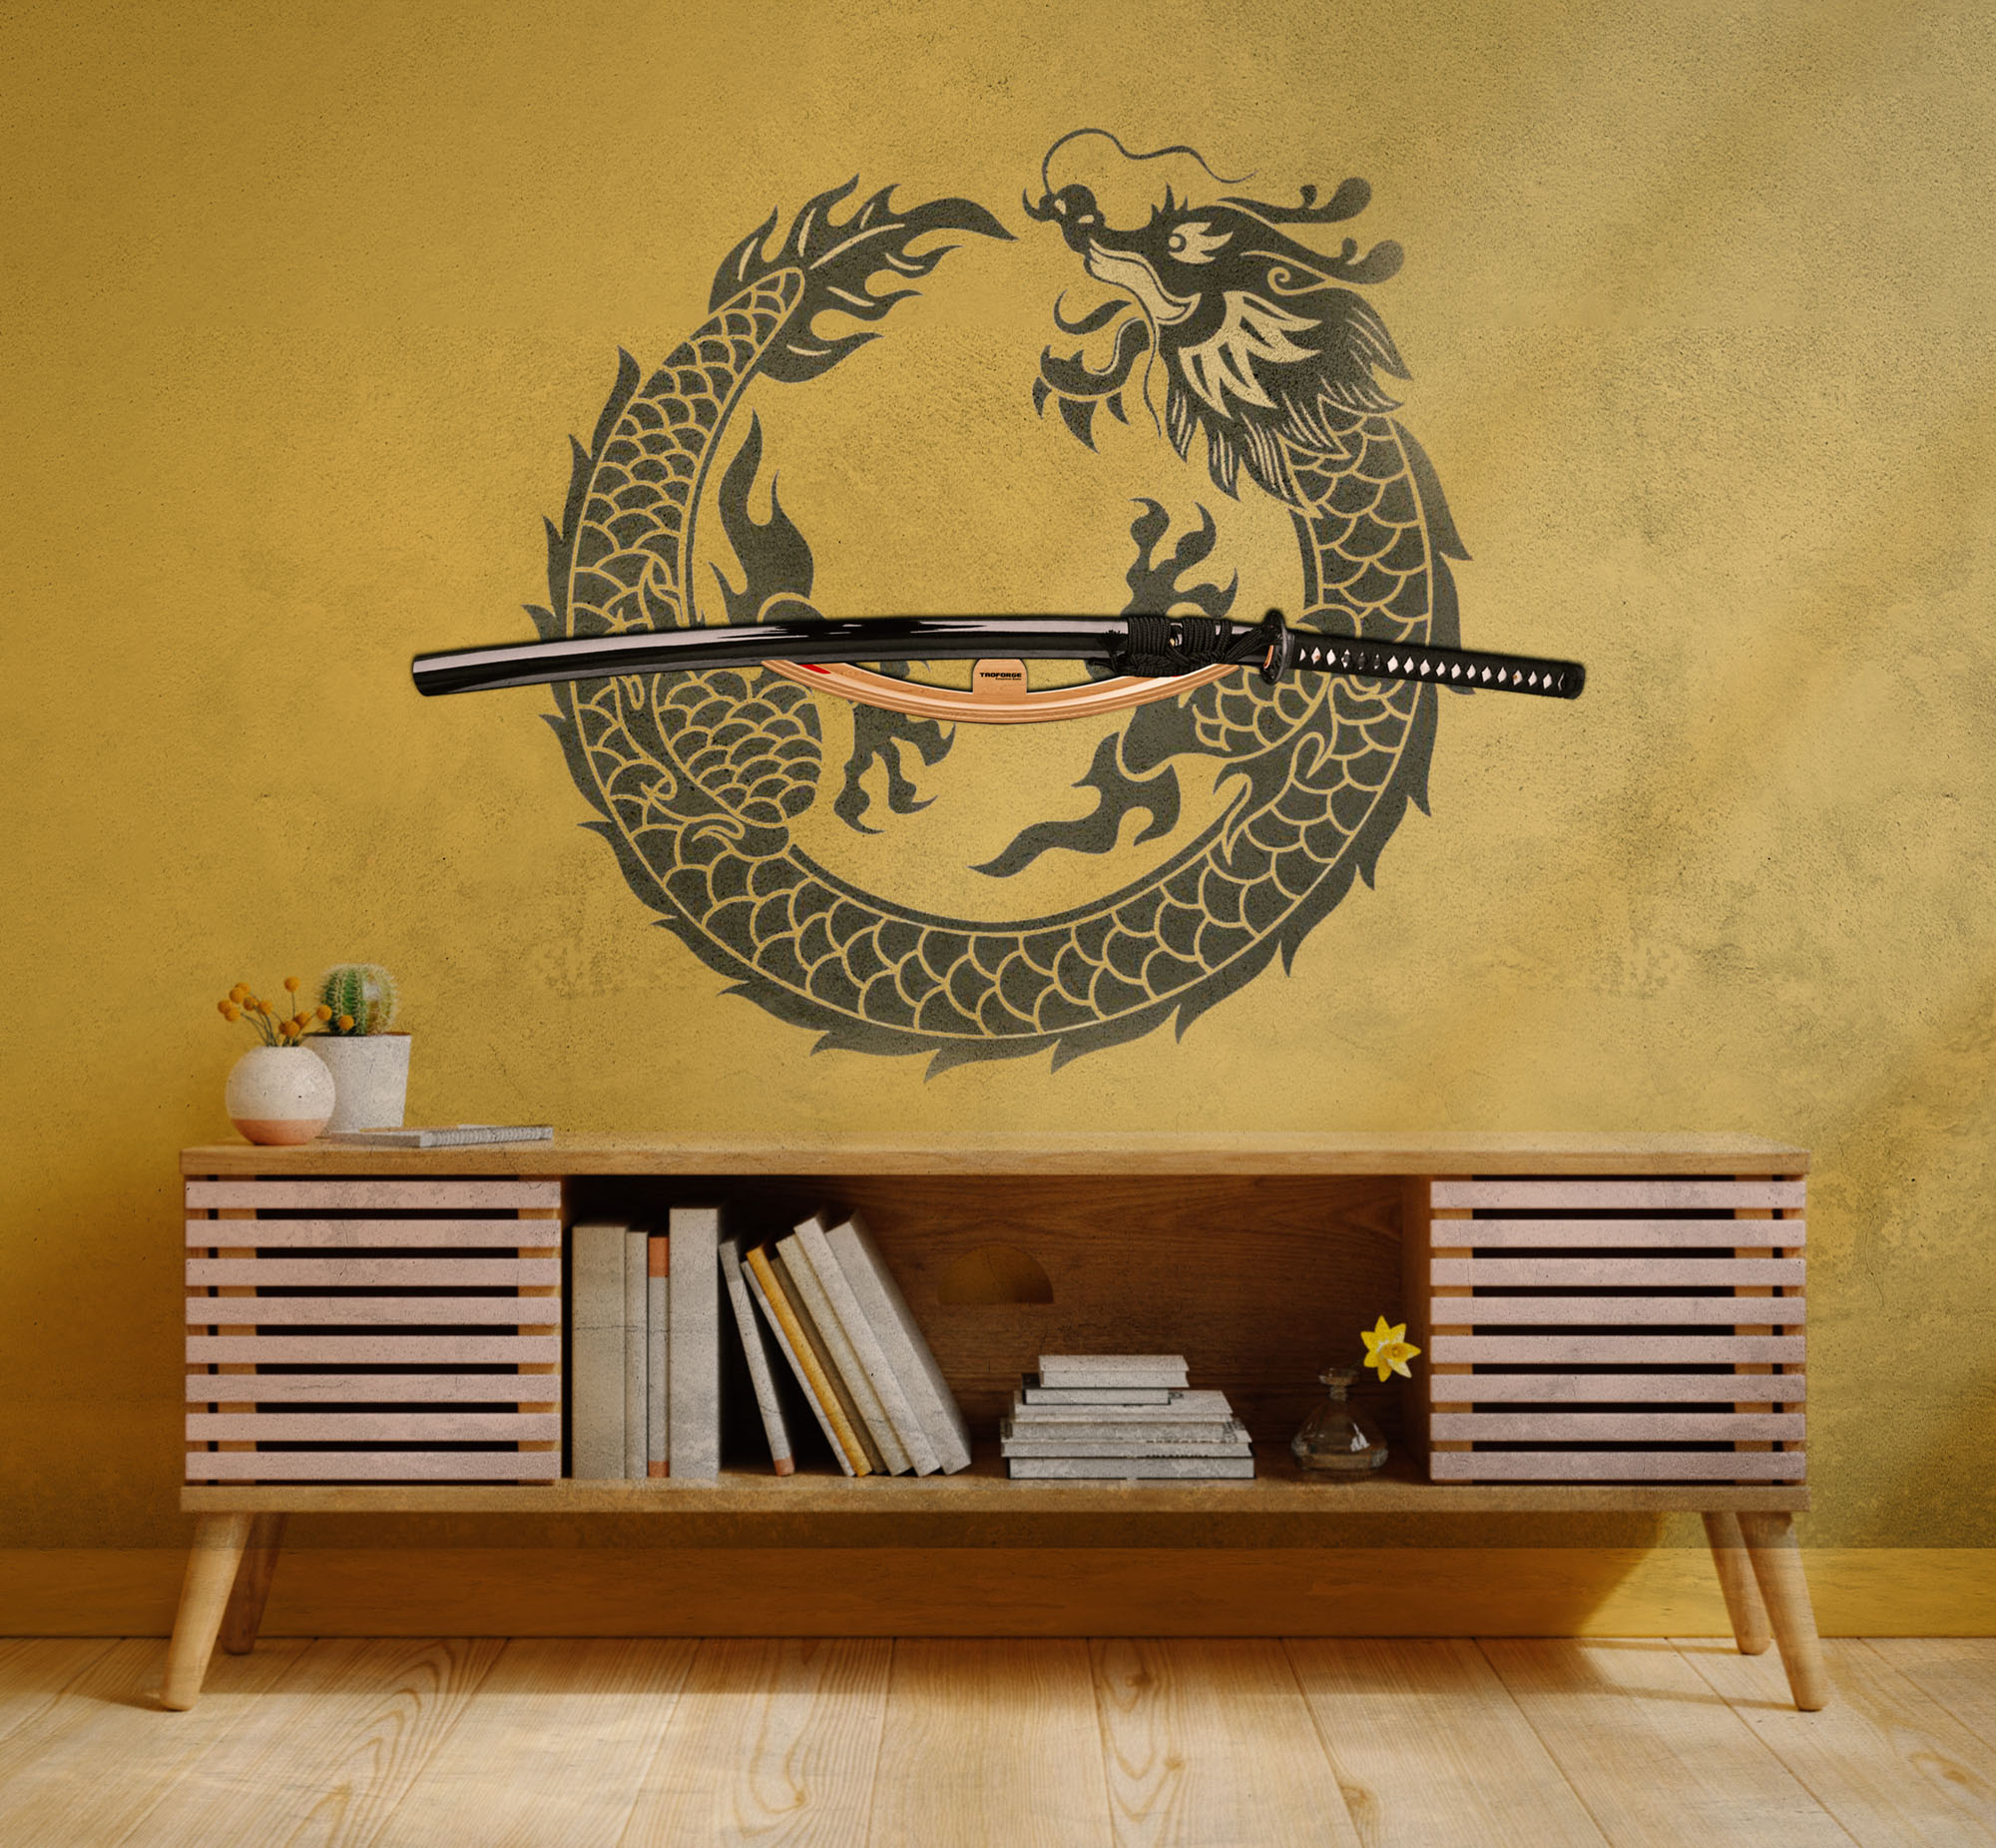 Design wall mount for a sword - natural wood